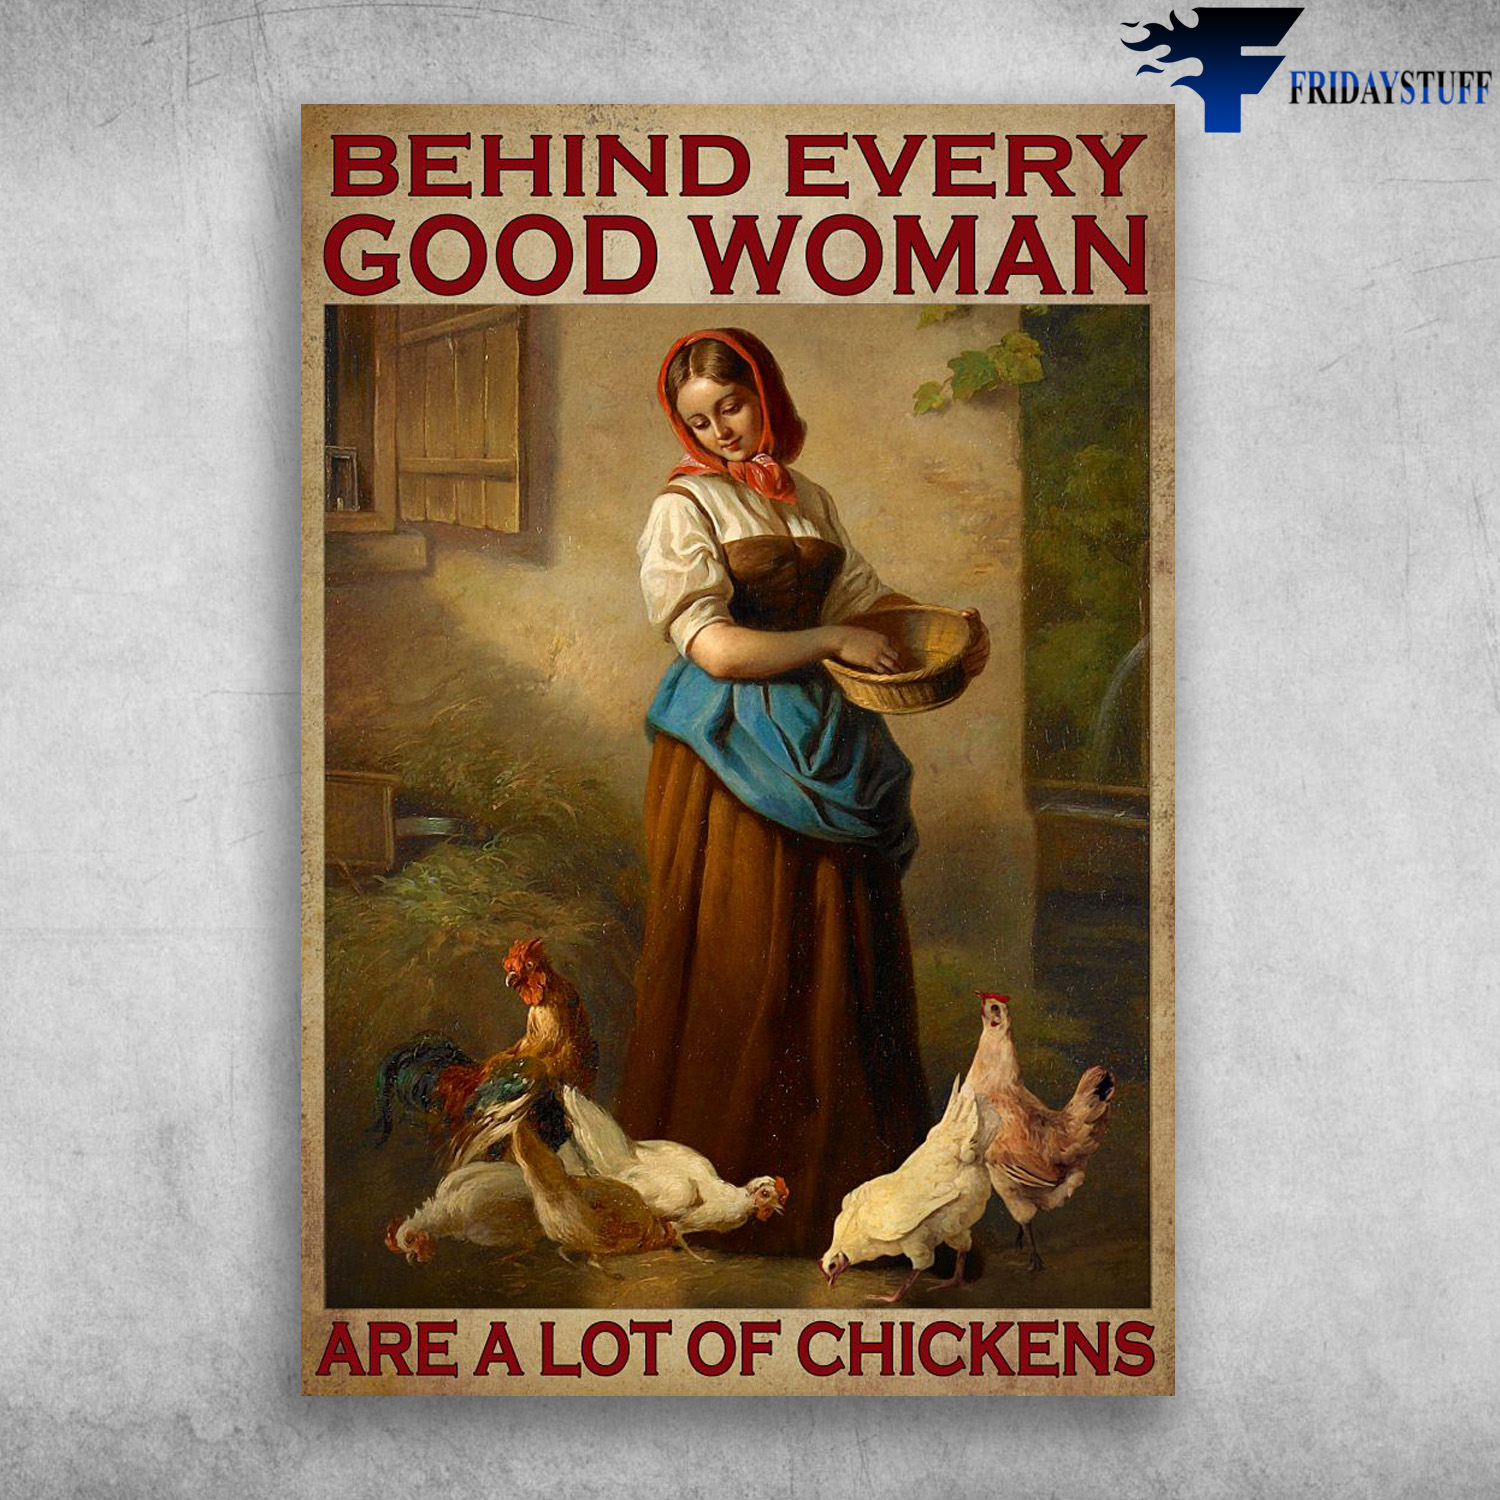 Girl Loves Chicken - Be Hind Every Good Woman, Are A Lot Of Chickens